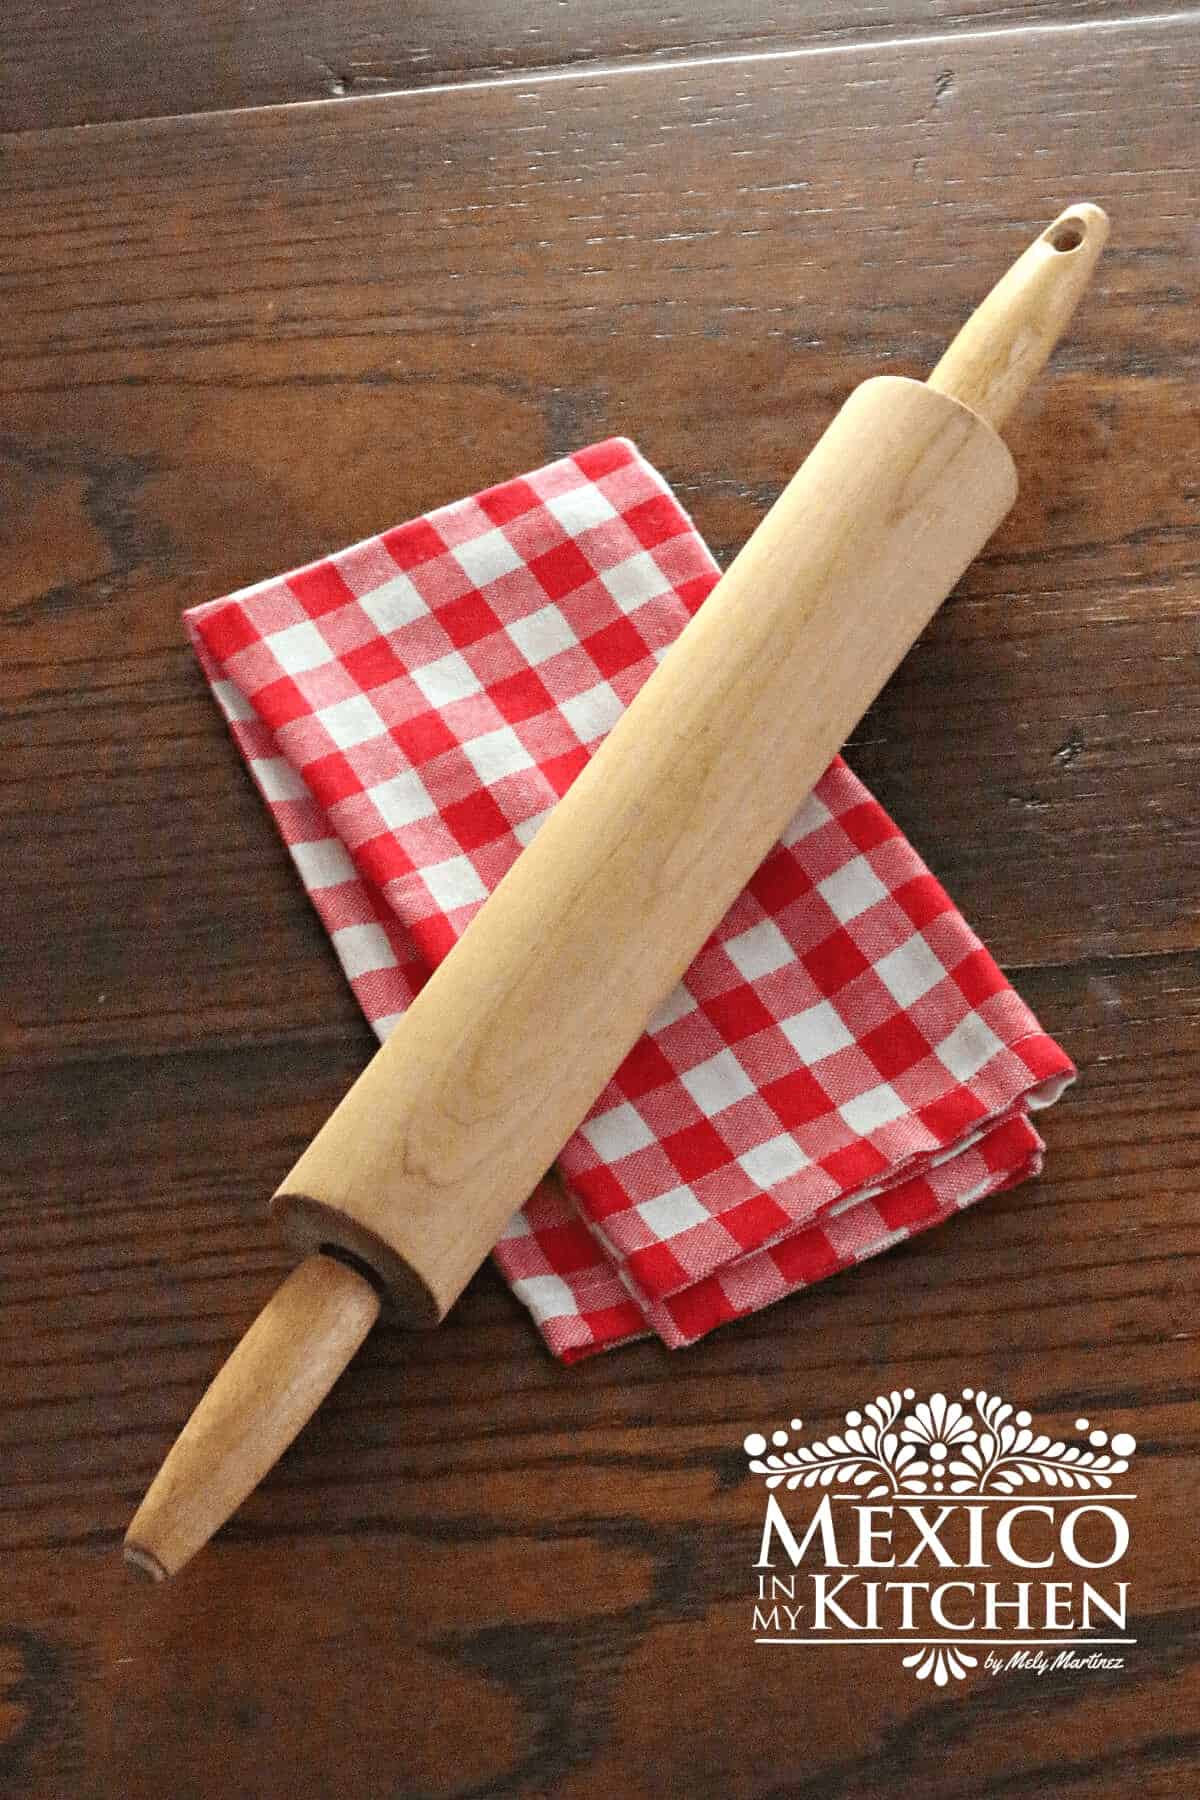 Mexican rolling pins on a cloth napkin.